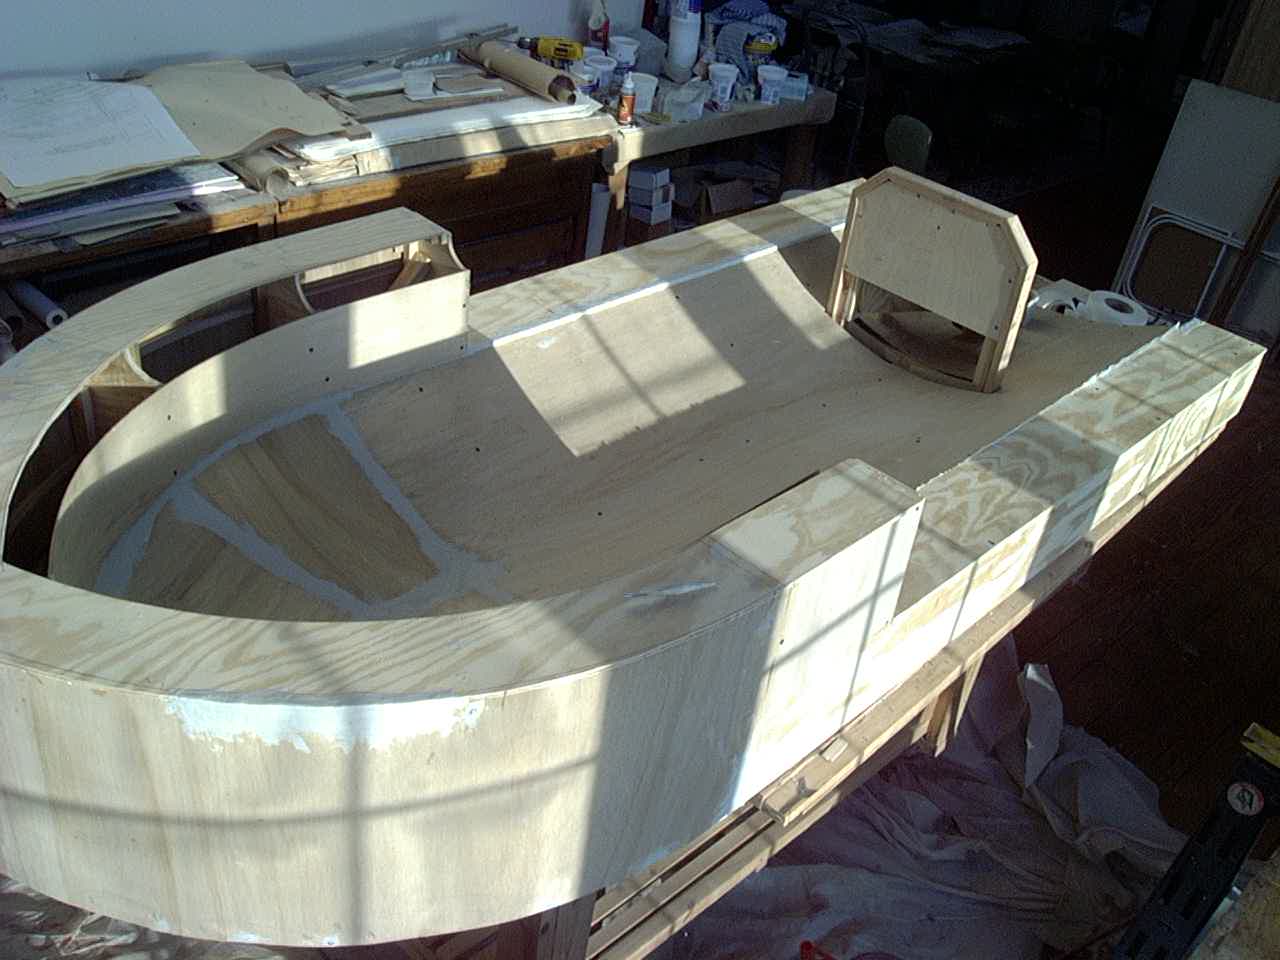 Preliminary build-up for statue pedestal and PVC / resin surround molding